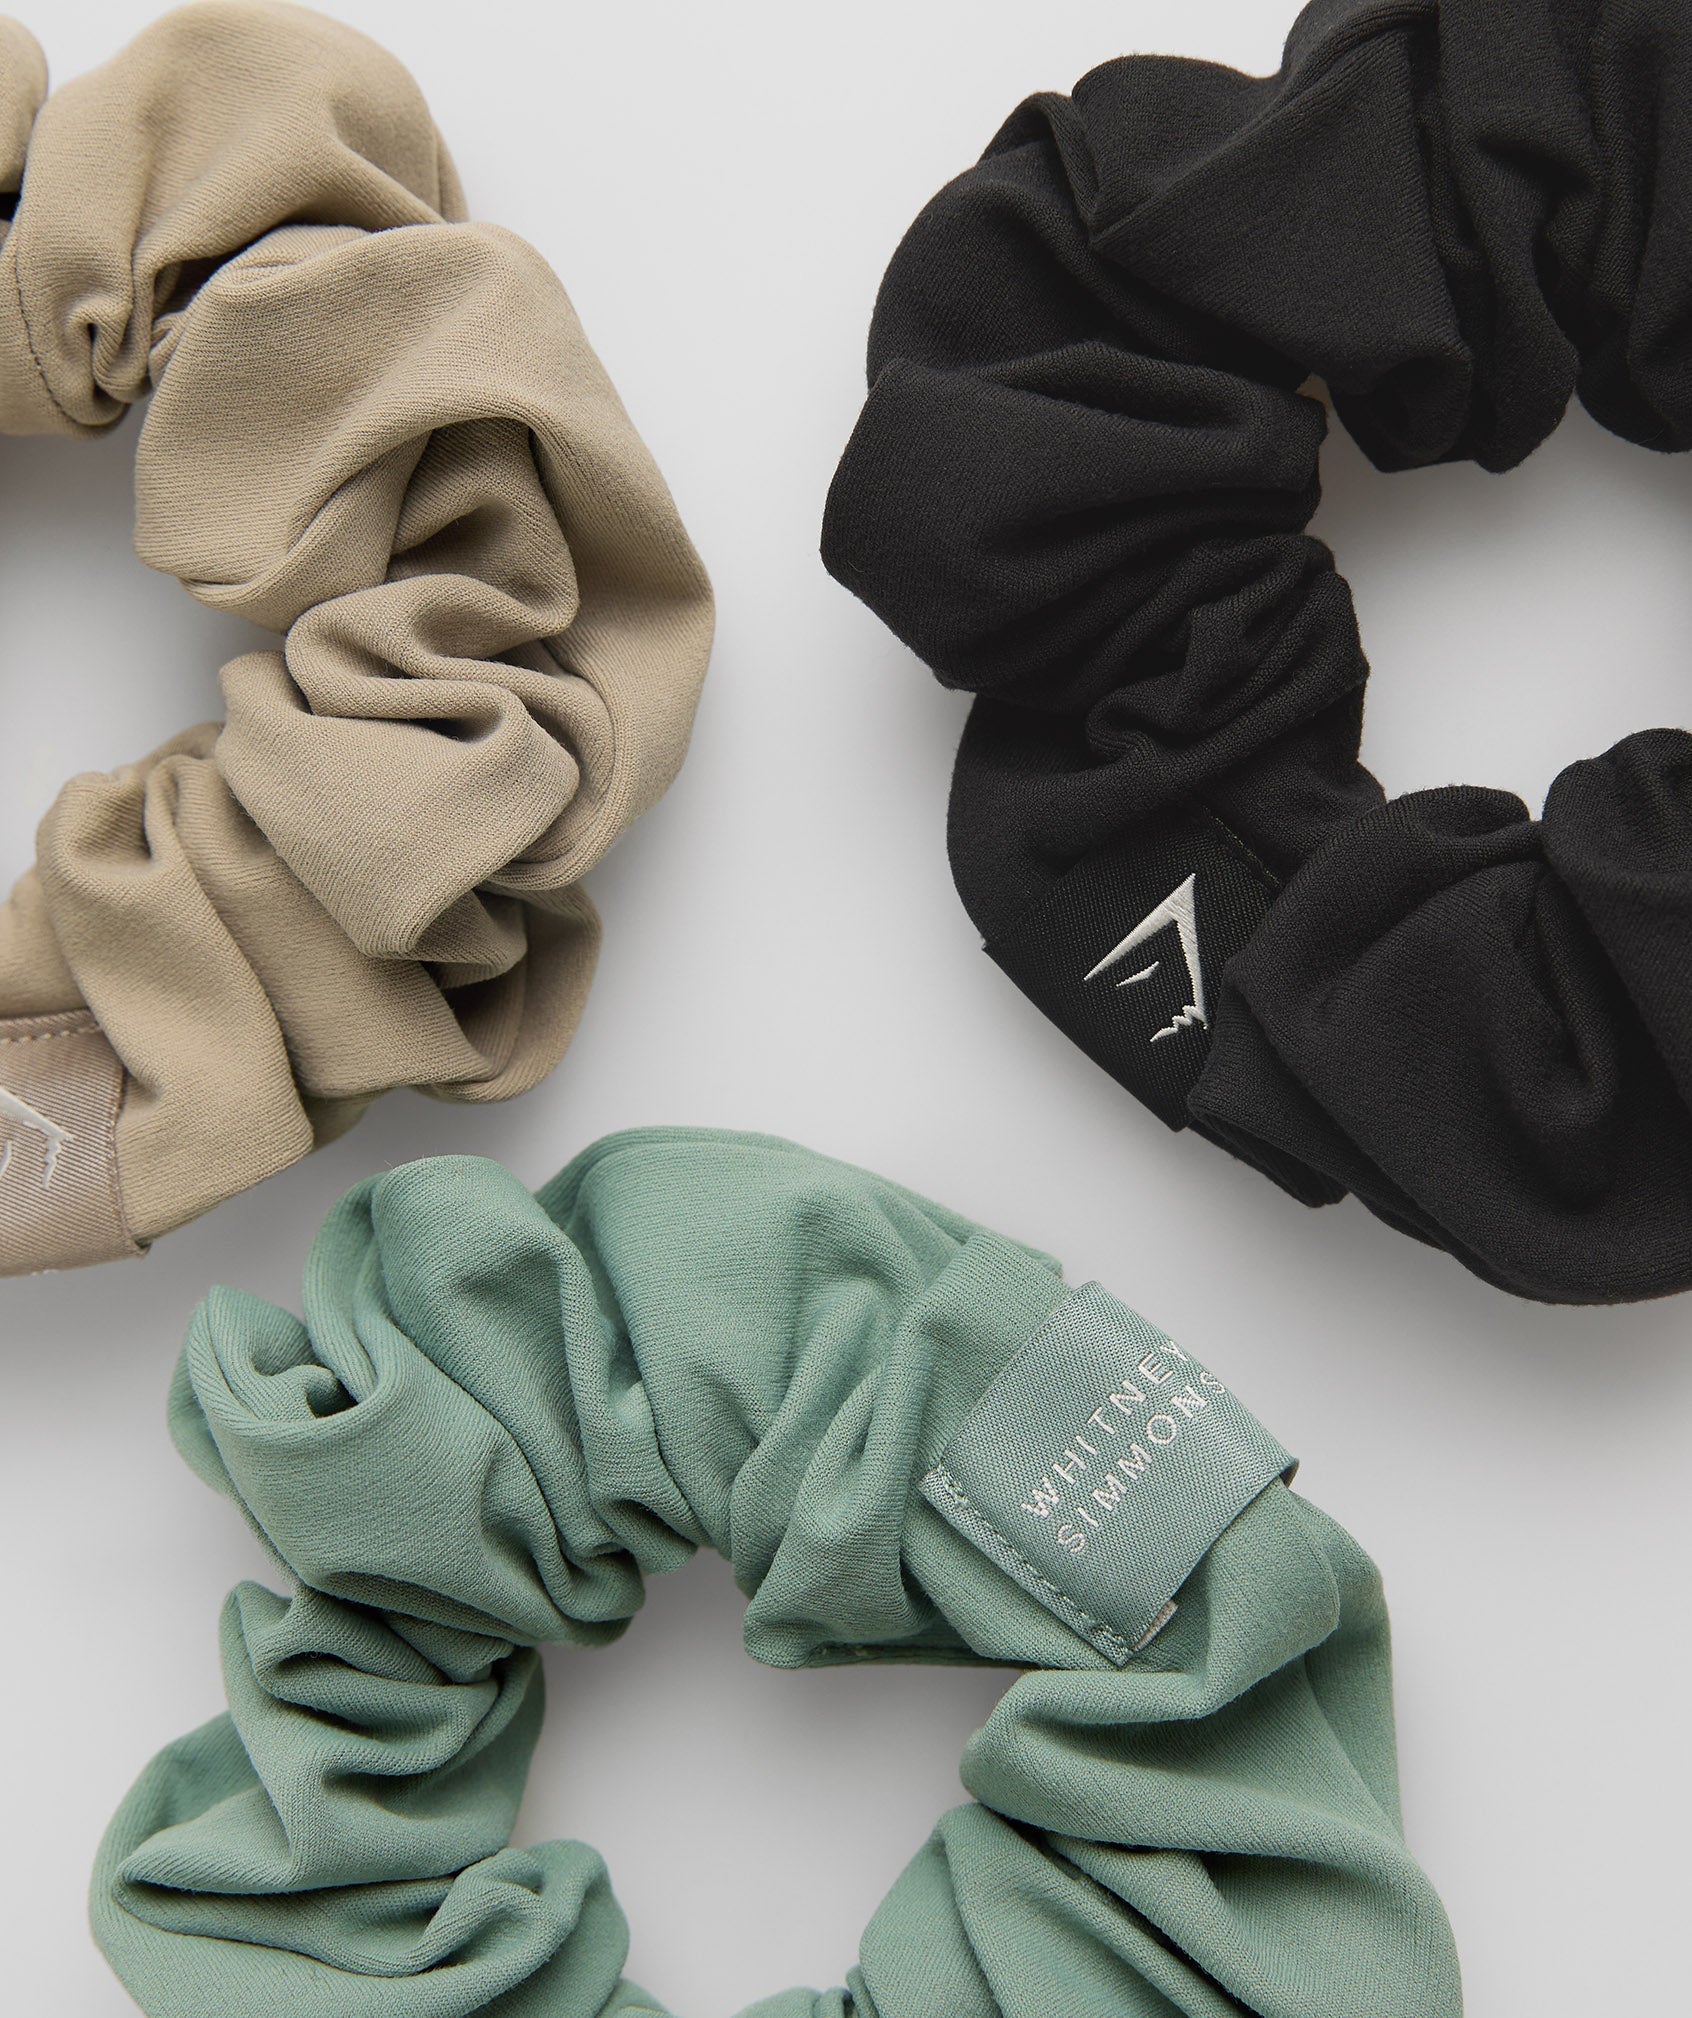 Whitney Scrunchies 3PK in Black/Cement Brown/Leaf Green - view 3